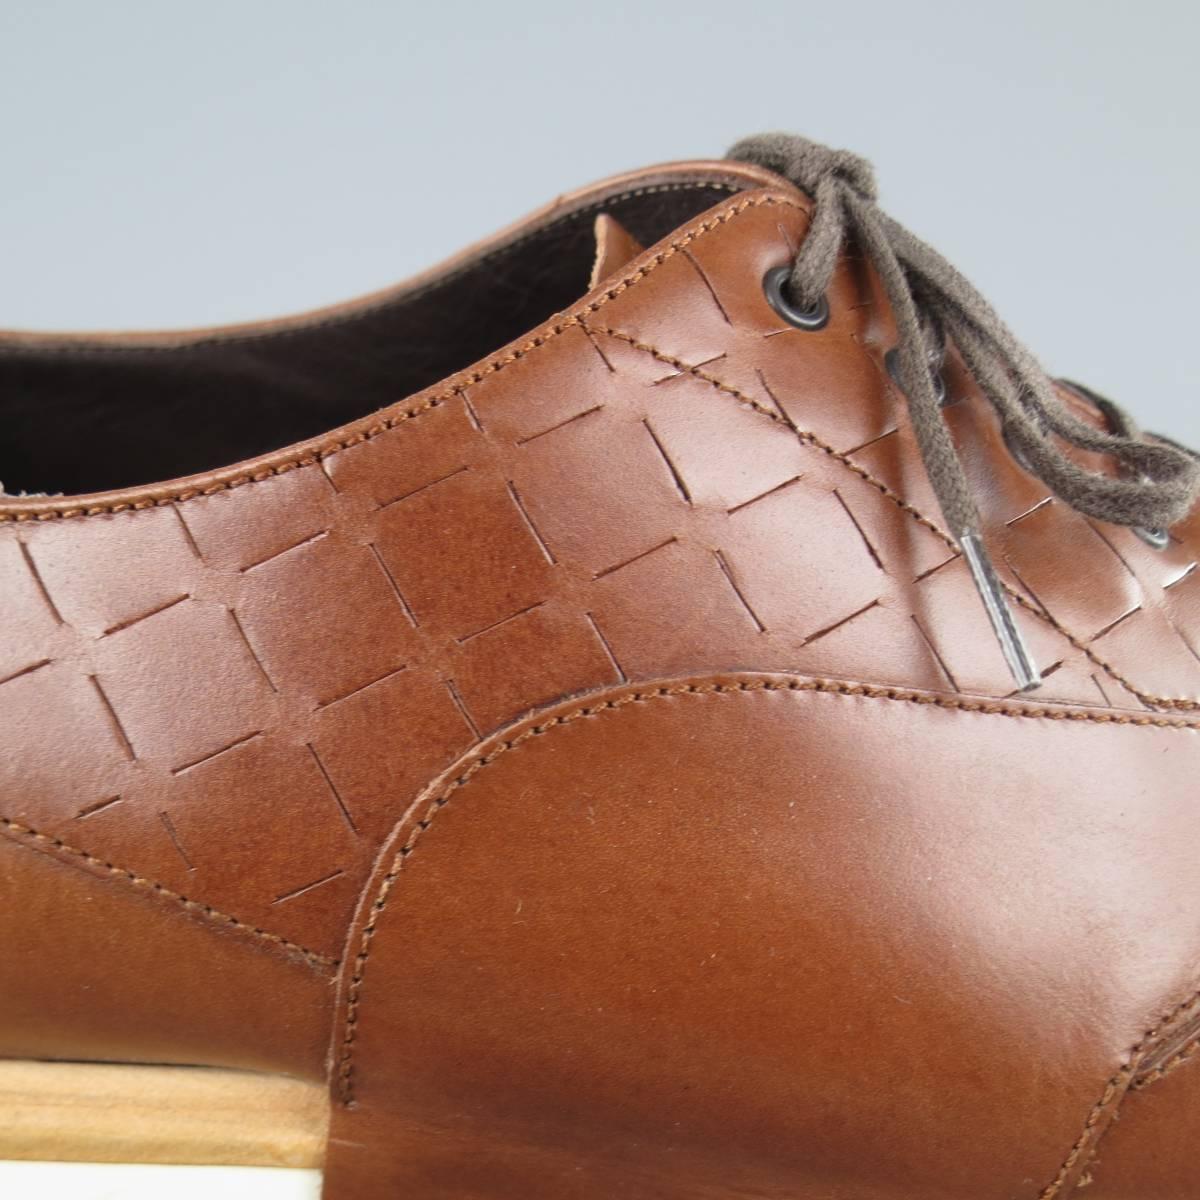 SALVATORE FERRAGAMO lace ups come in a tan smooth leather and feature a slit checkered pattern panel, wingtip toe, and off white rubber sole. Wear throughout. As-Is. Made in Italy.
 
Fair Pre-Owned Condition.
 
Outsole: 12.75 x 4.5 in.